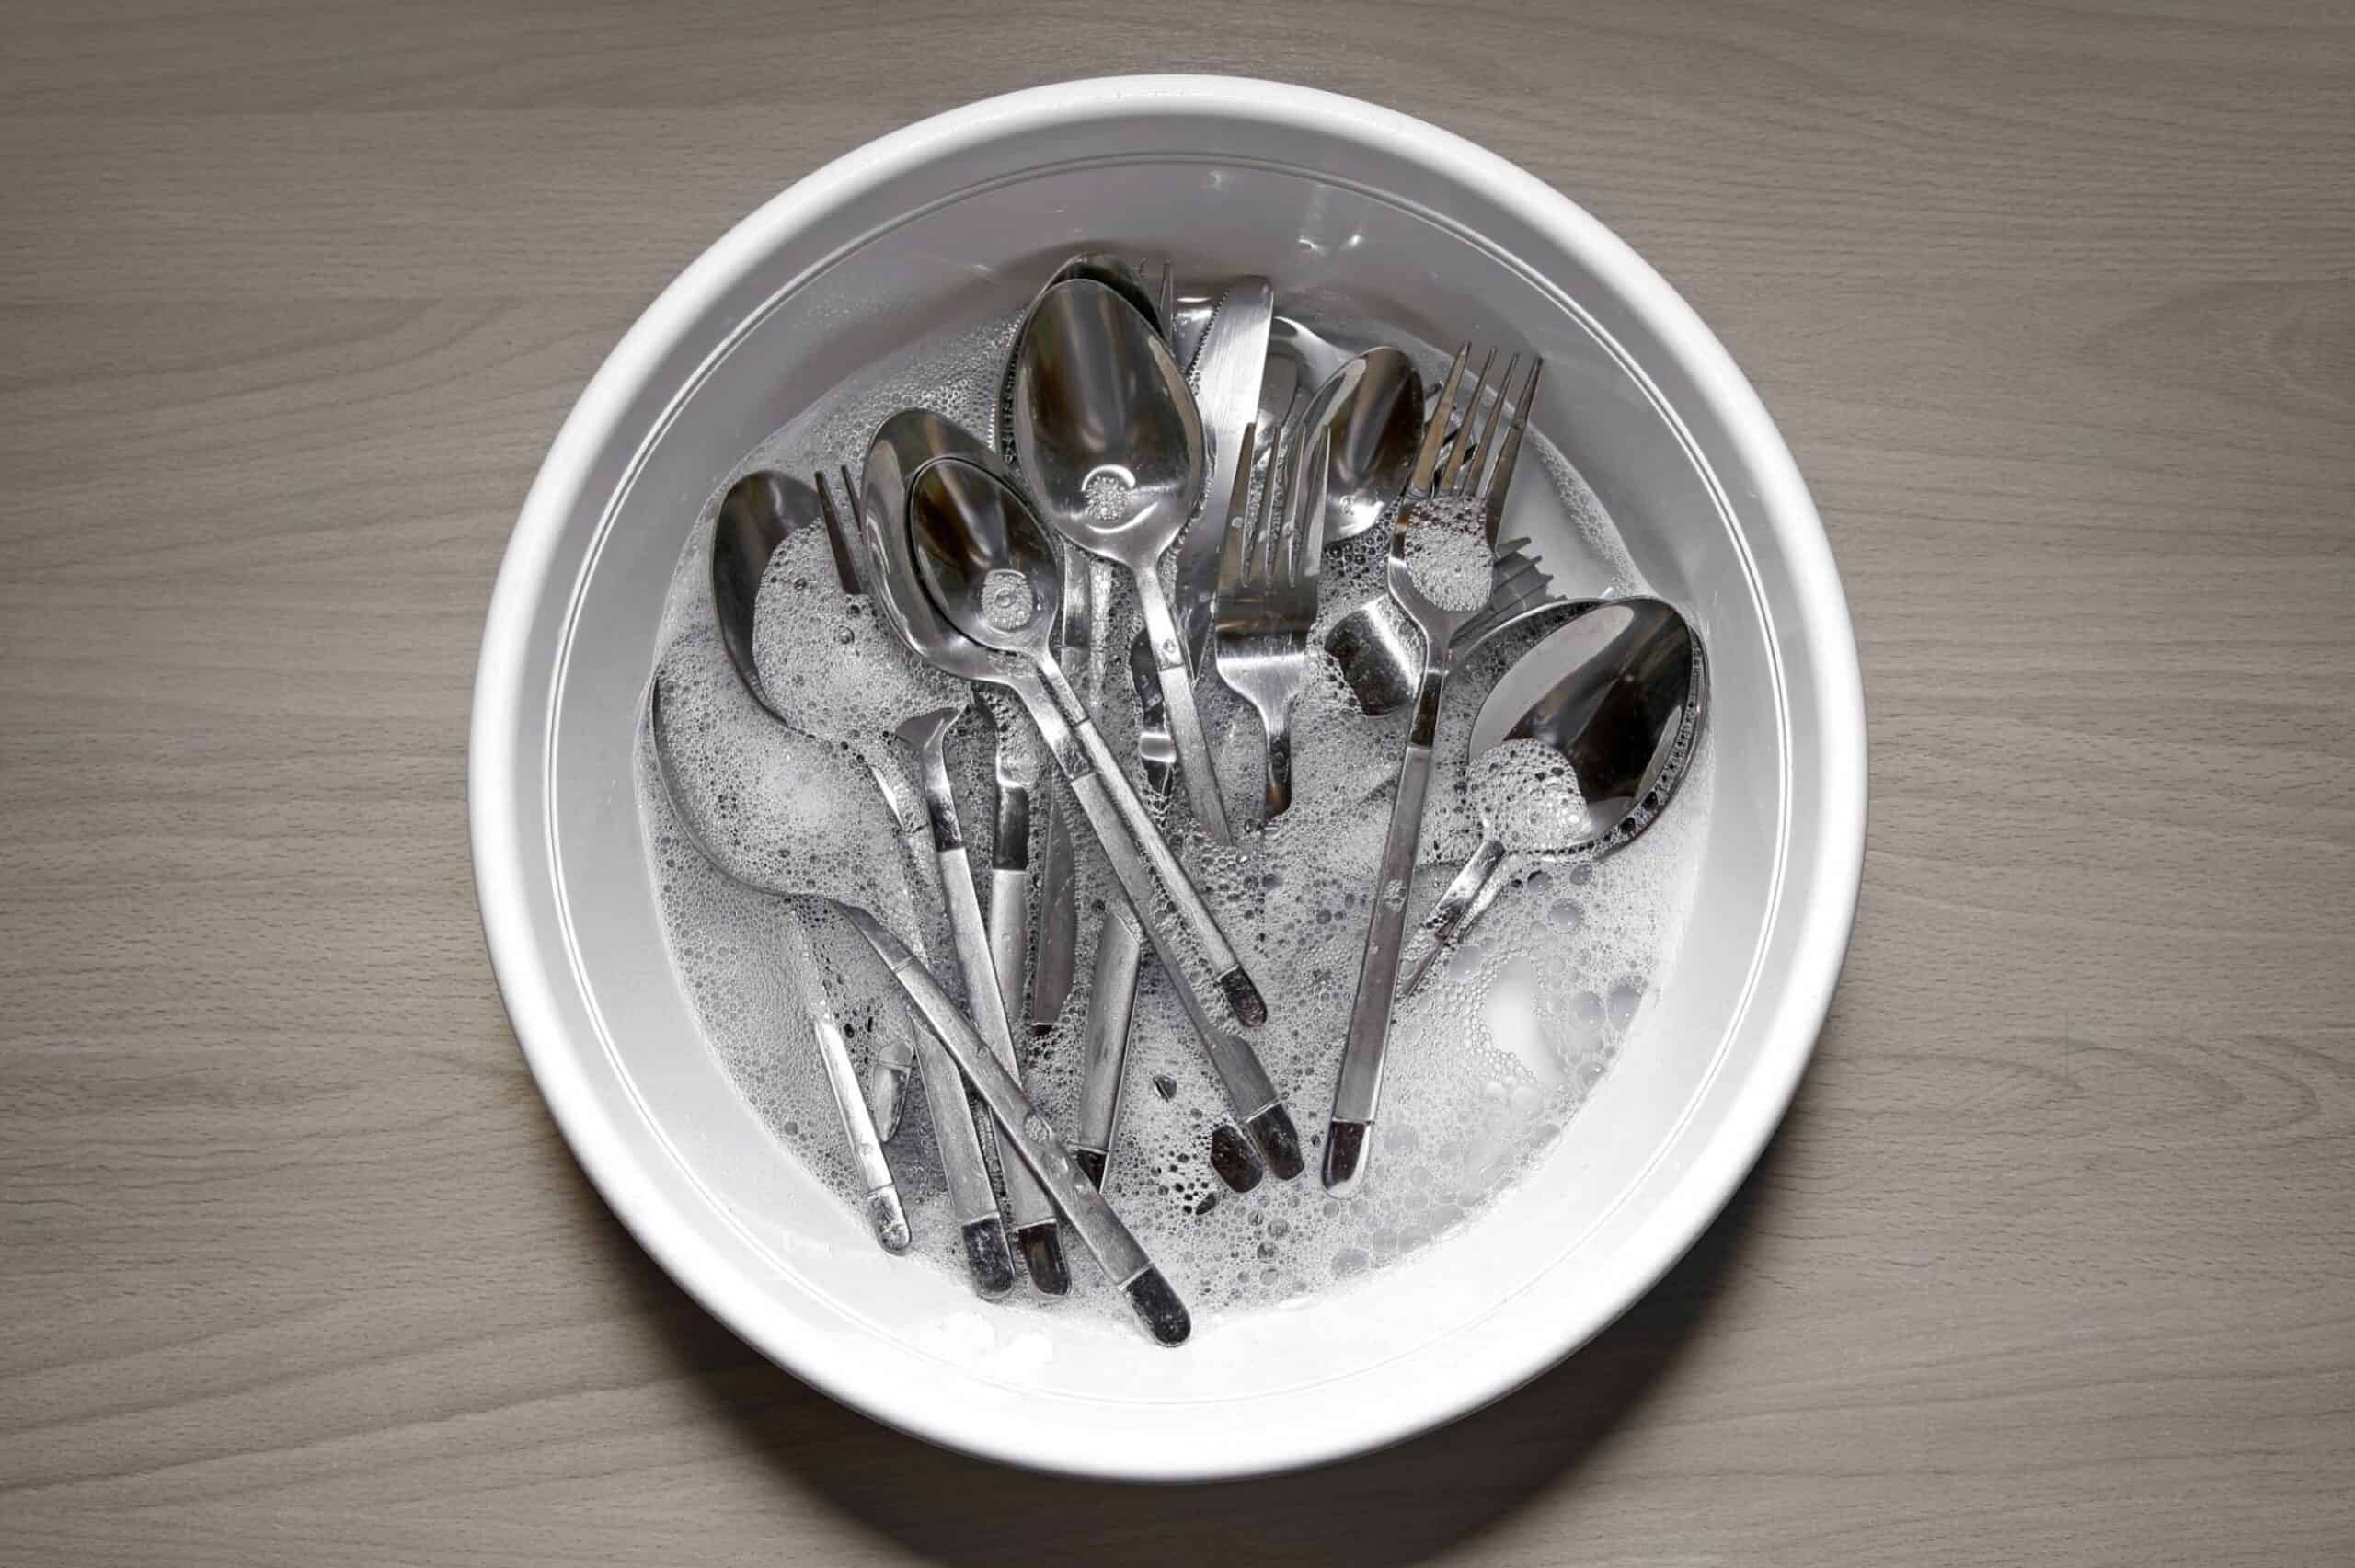 Expert Tips for Cleaning Tarnished Silver Tidyhere Image of Silverwares Soaked in Mild Detergent